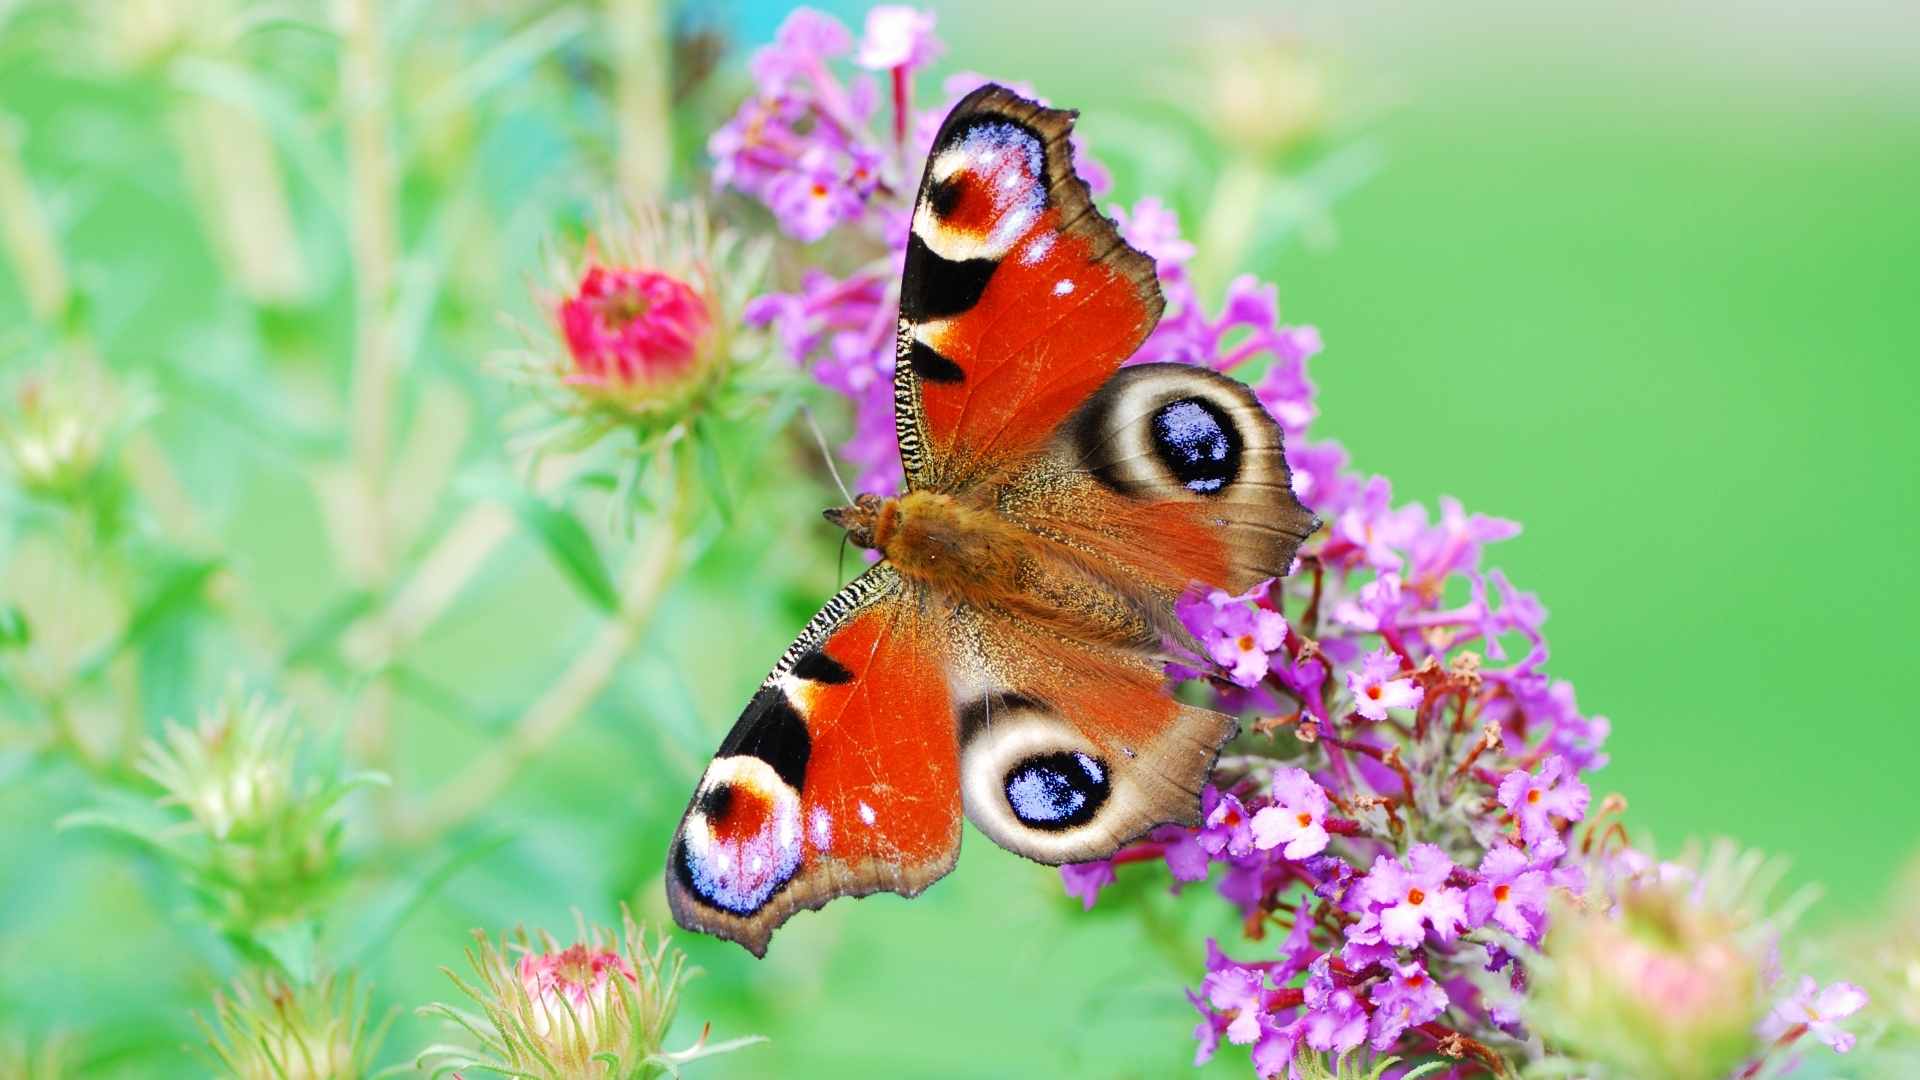 Full HD butterflies, insects